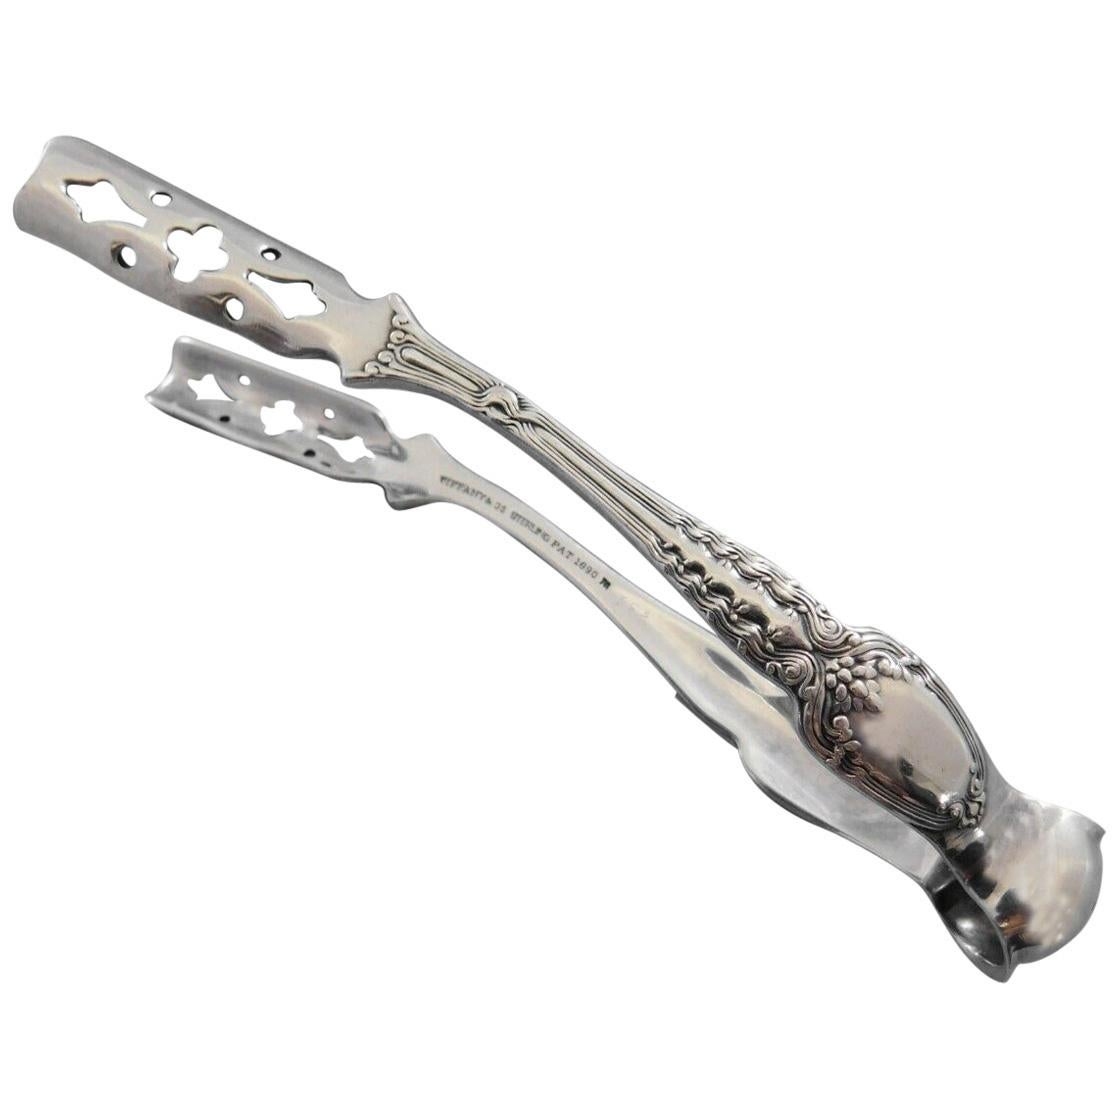 Broom Corn by Tiffany & Co. Sterling Silver Individual Asparagus Tongs